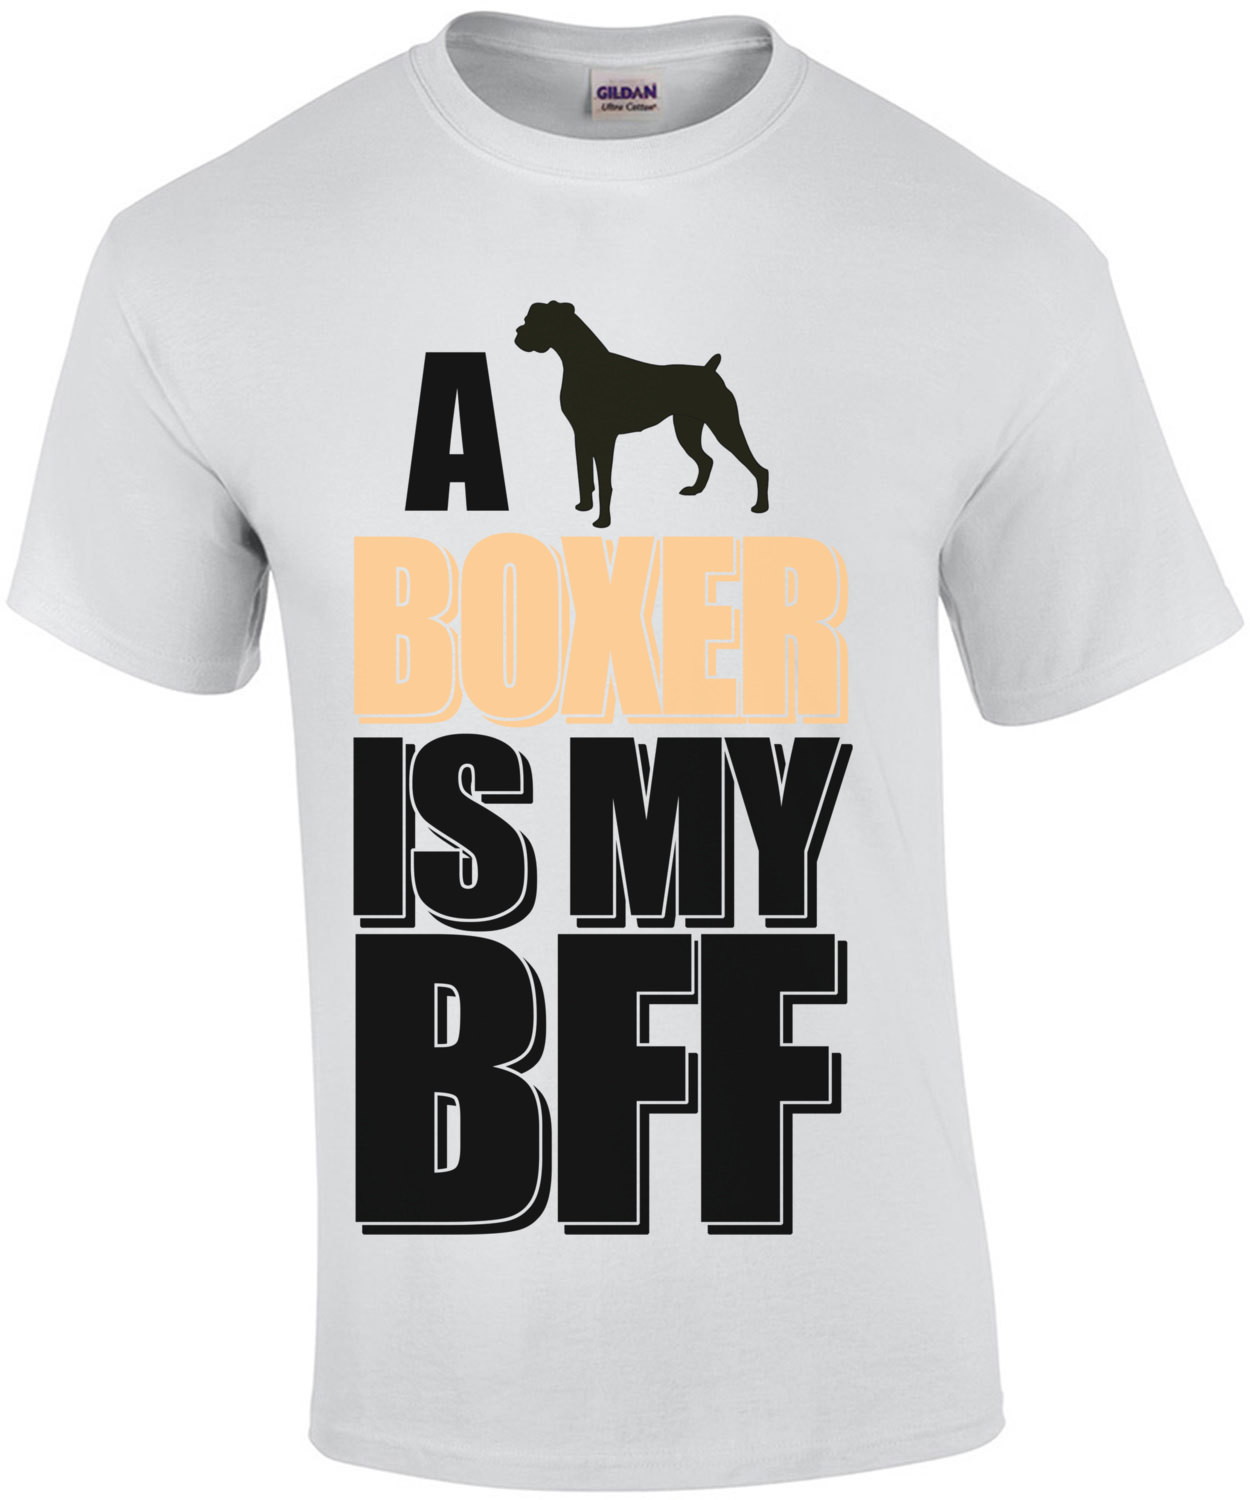 A Boxer Is My Bff T-Shirt